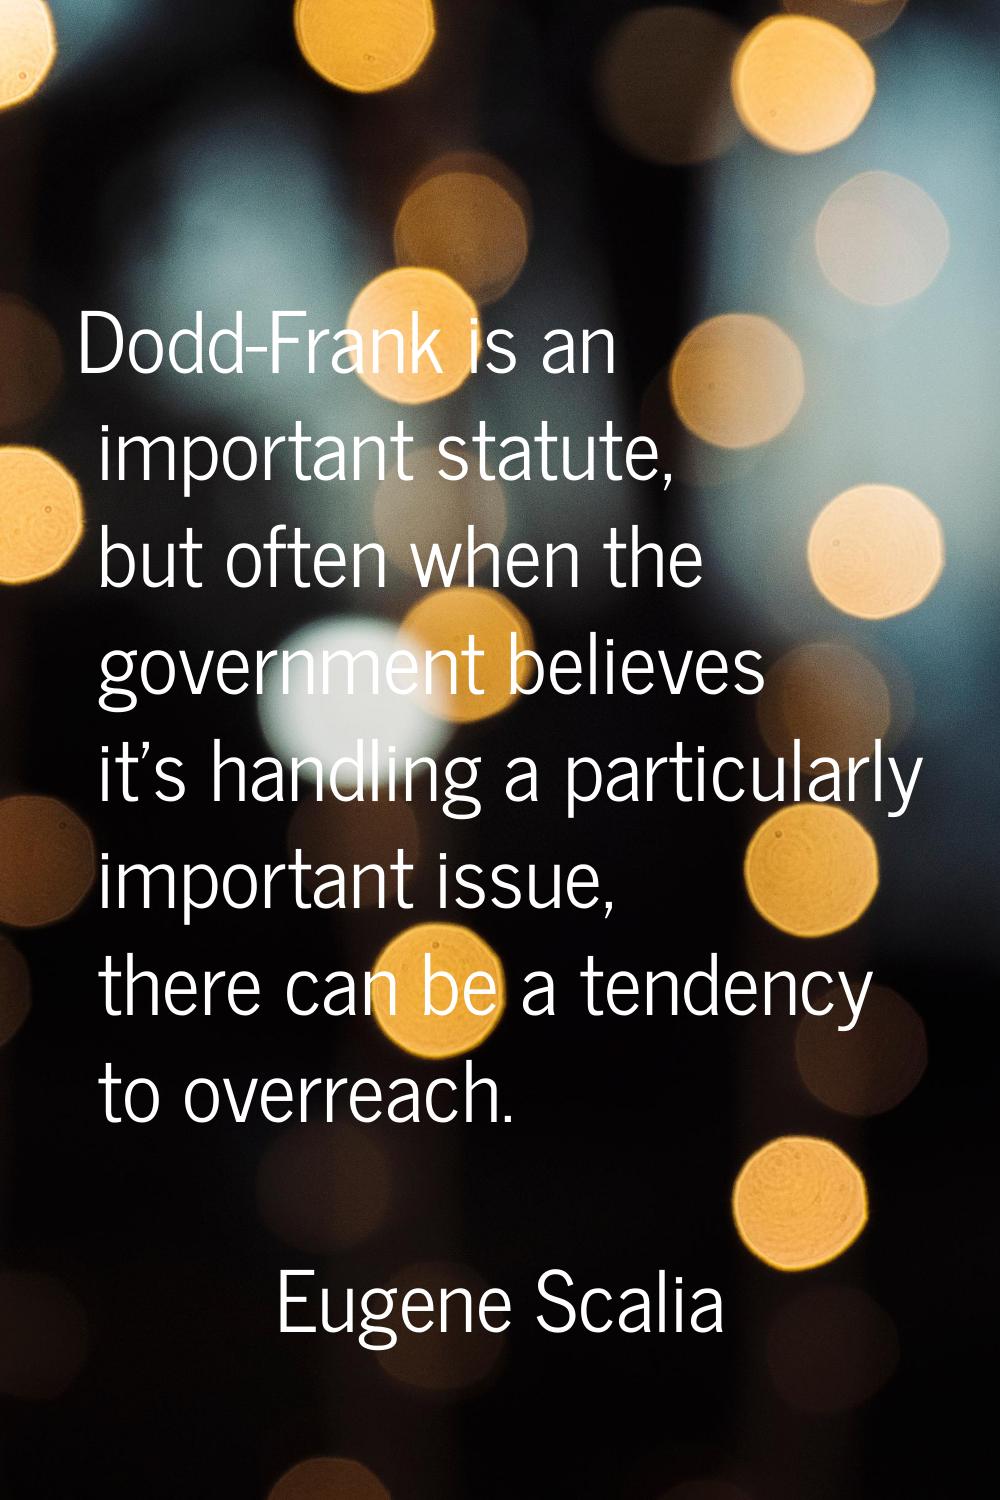 Dodd-Frank is an important statute, but often when the government believes it's handling a particul